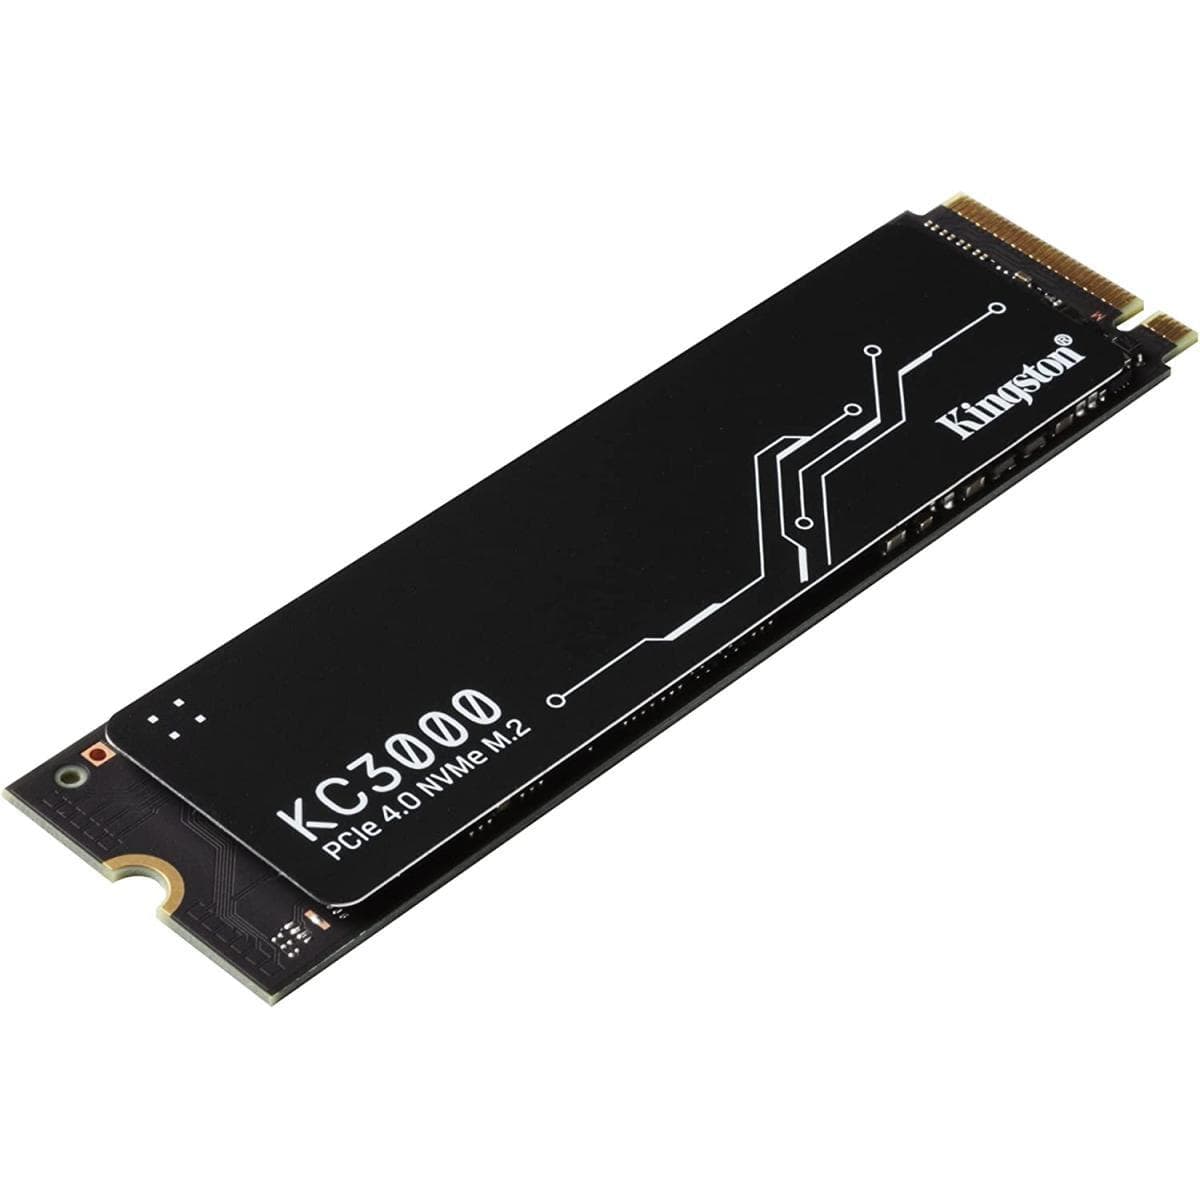 KINGSTON Solid State Drive Kingston KC3000 512GB PCIe 4.0 NVMe M.2 SSD-Sequential Read/Write (7000/3900 MB/s)